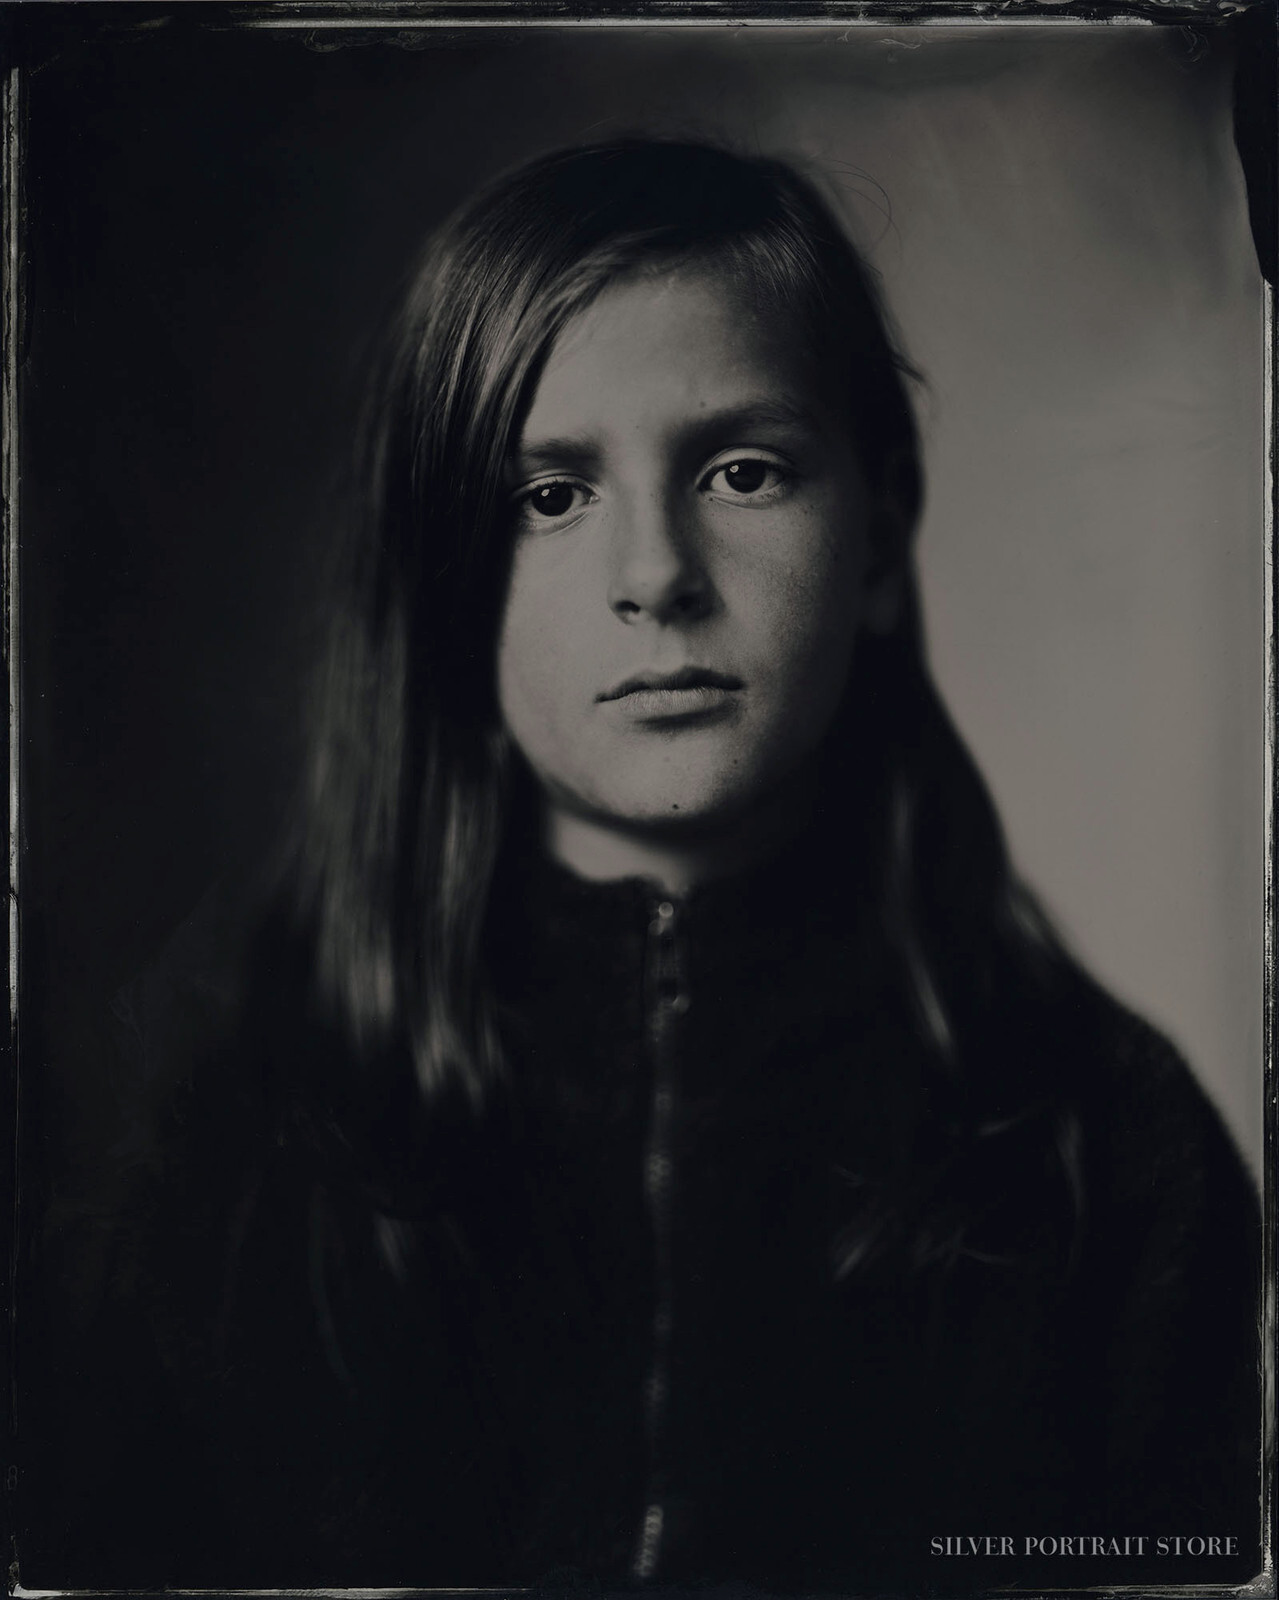 Hidde-Silver Portrait Store-scan from Wet plate collodion-Tintype 20 x 25 cm.